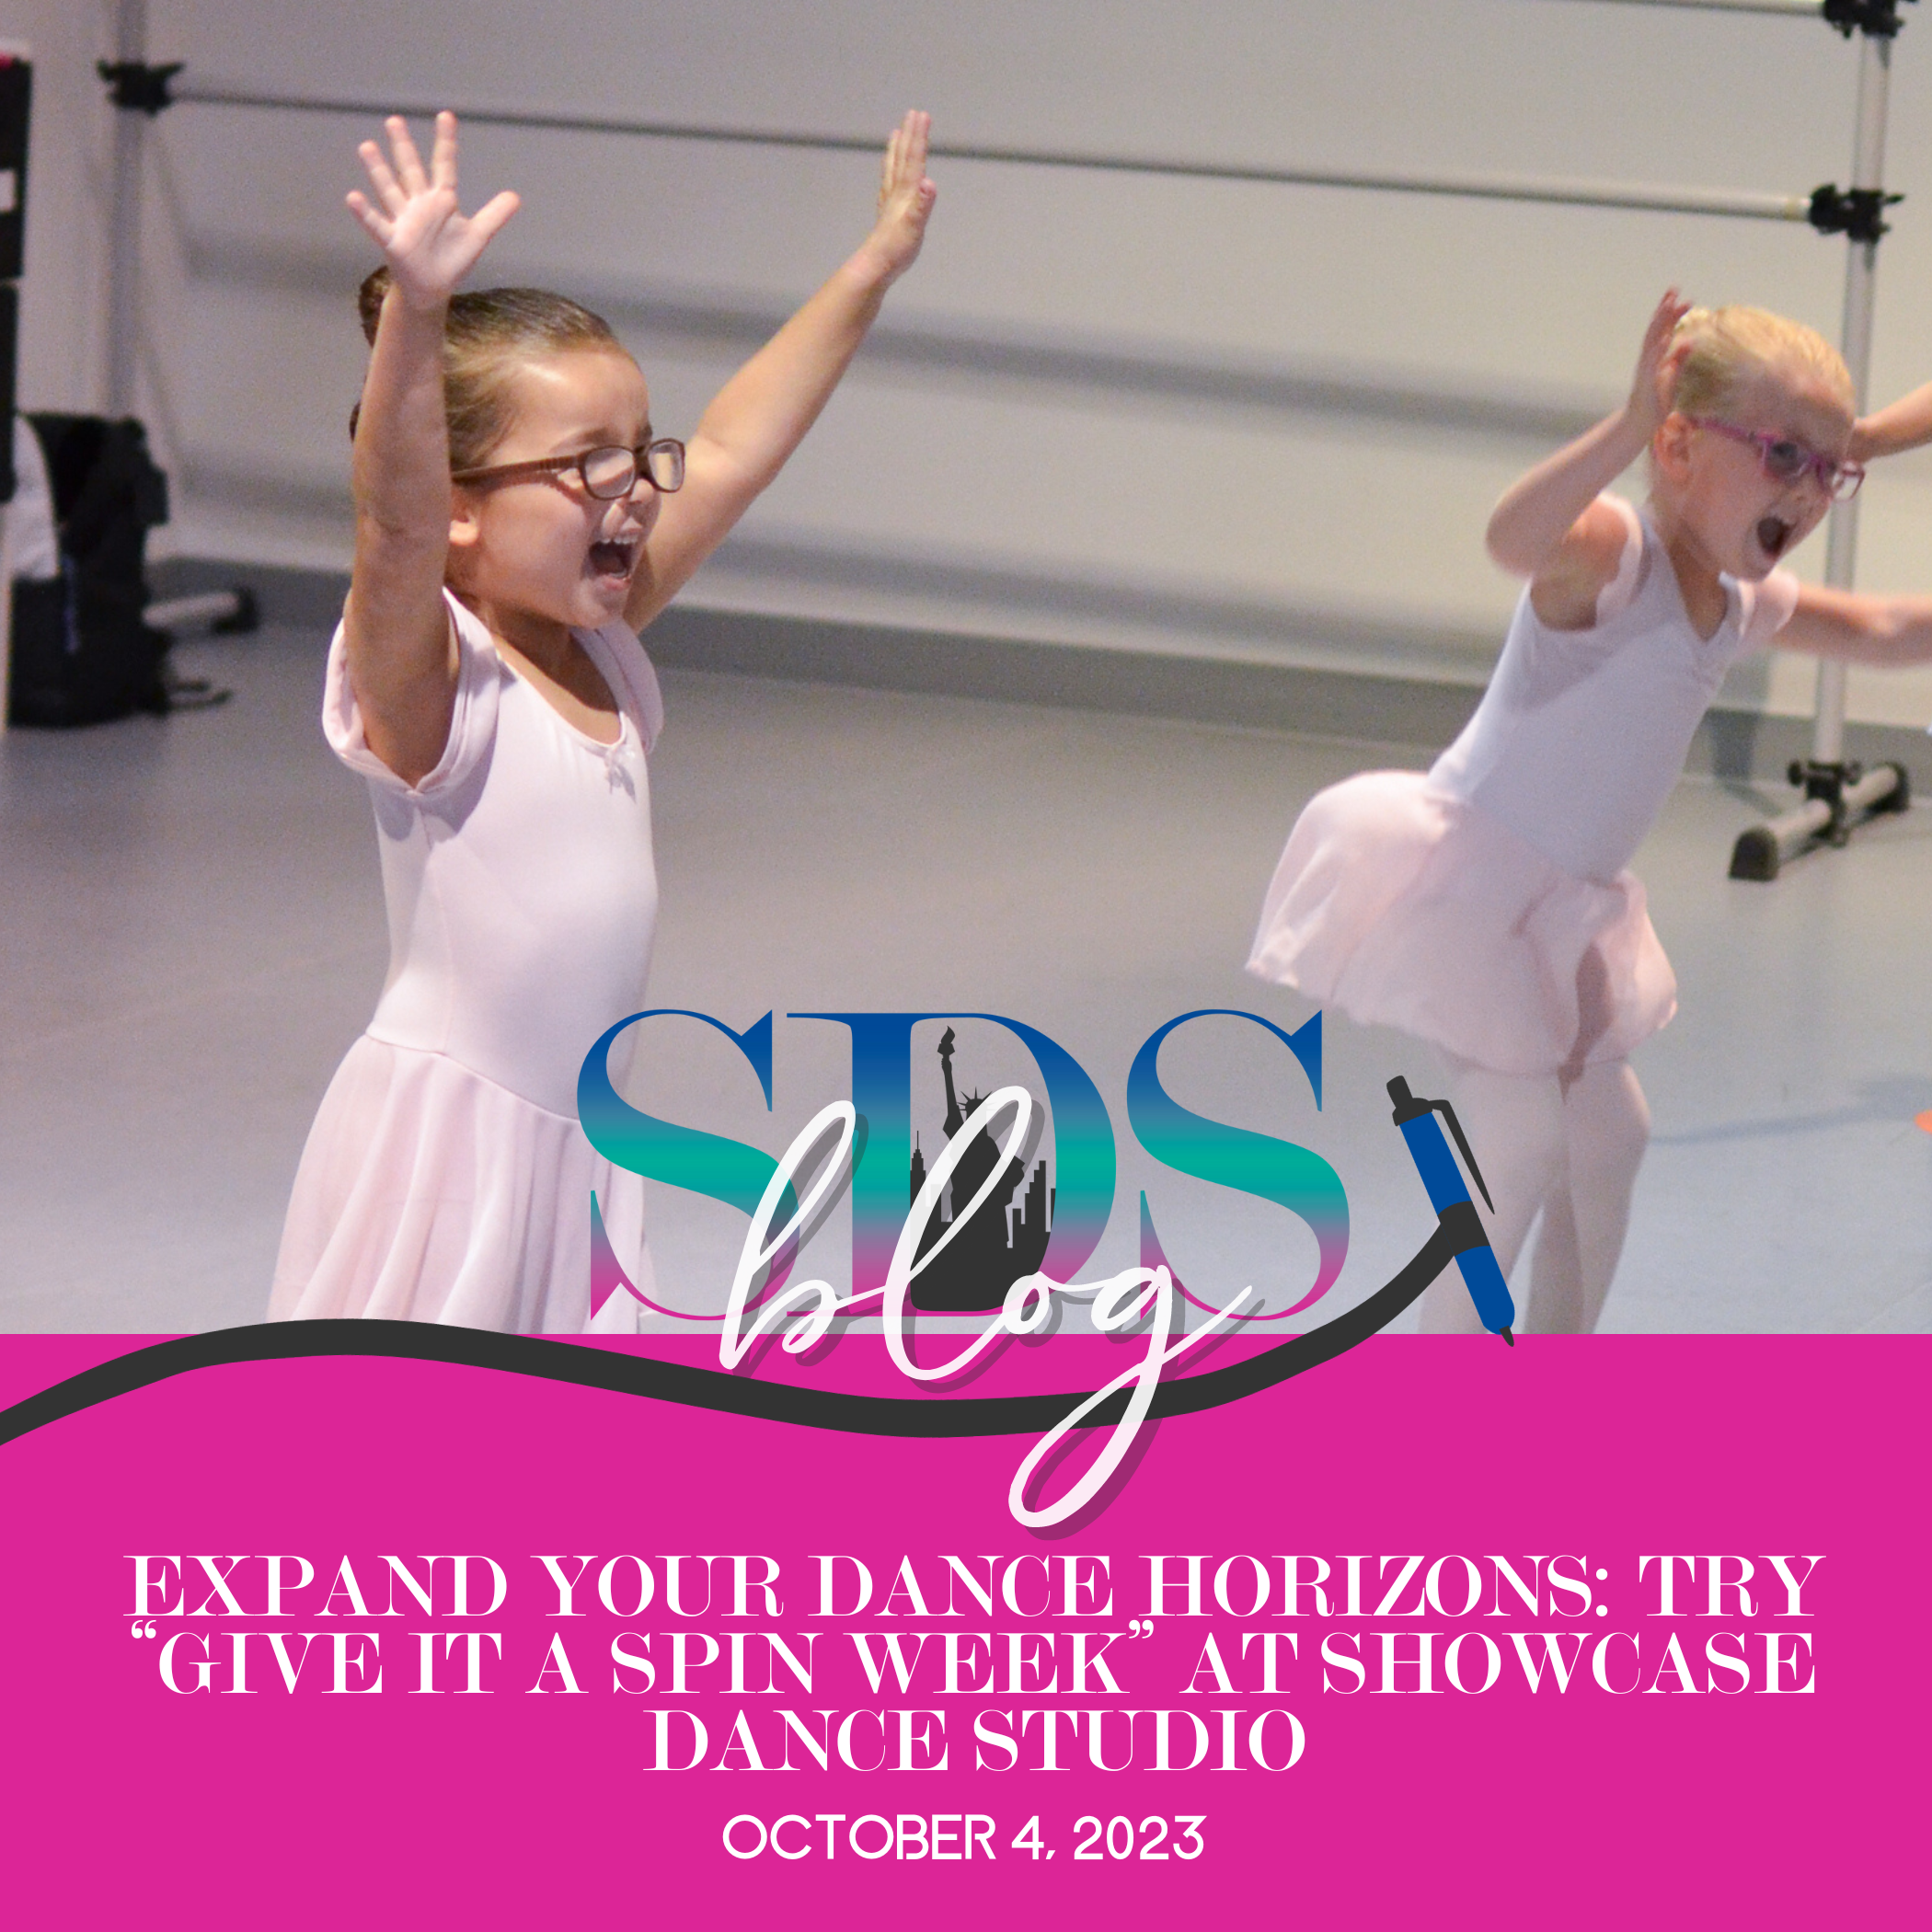 Expand Your Dance Horizons: Try “Give It a Spin Week” at Showcase Dance Studio